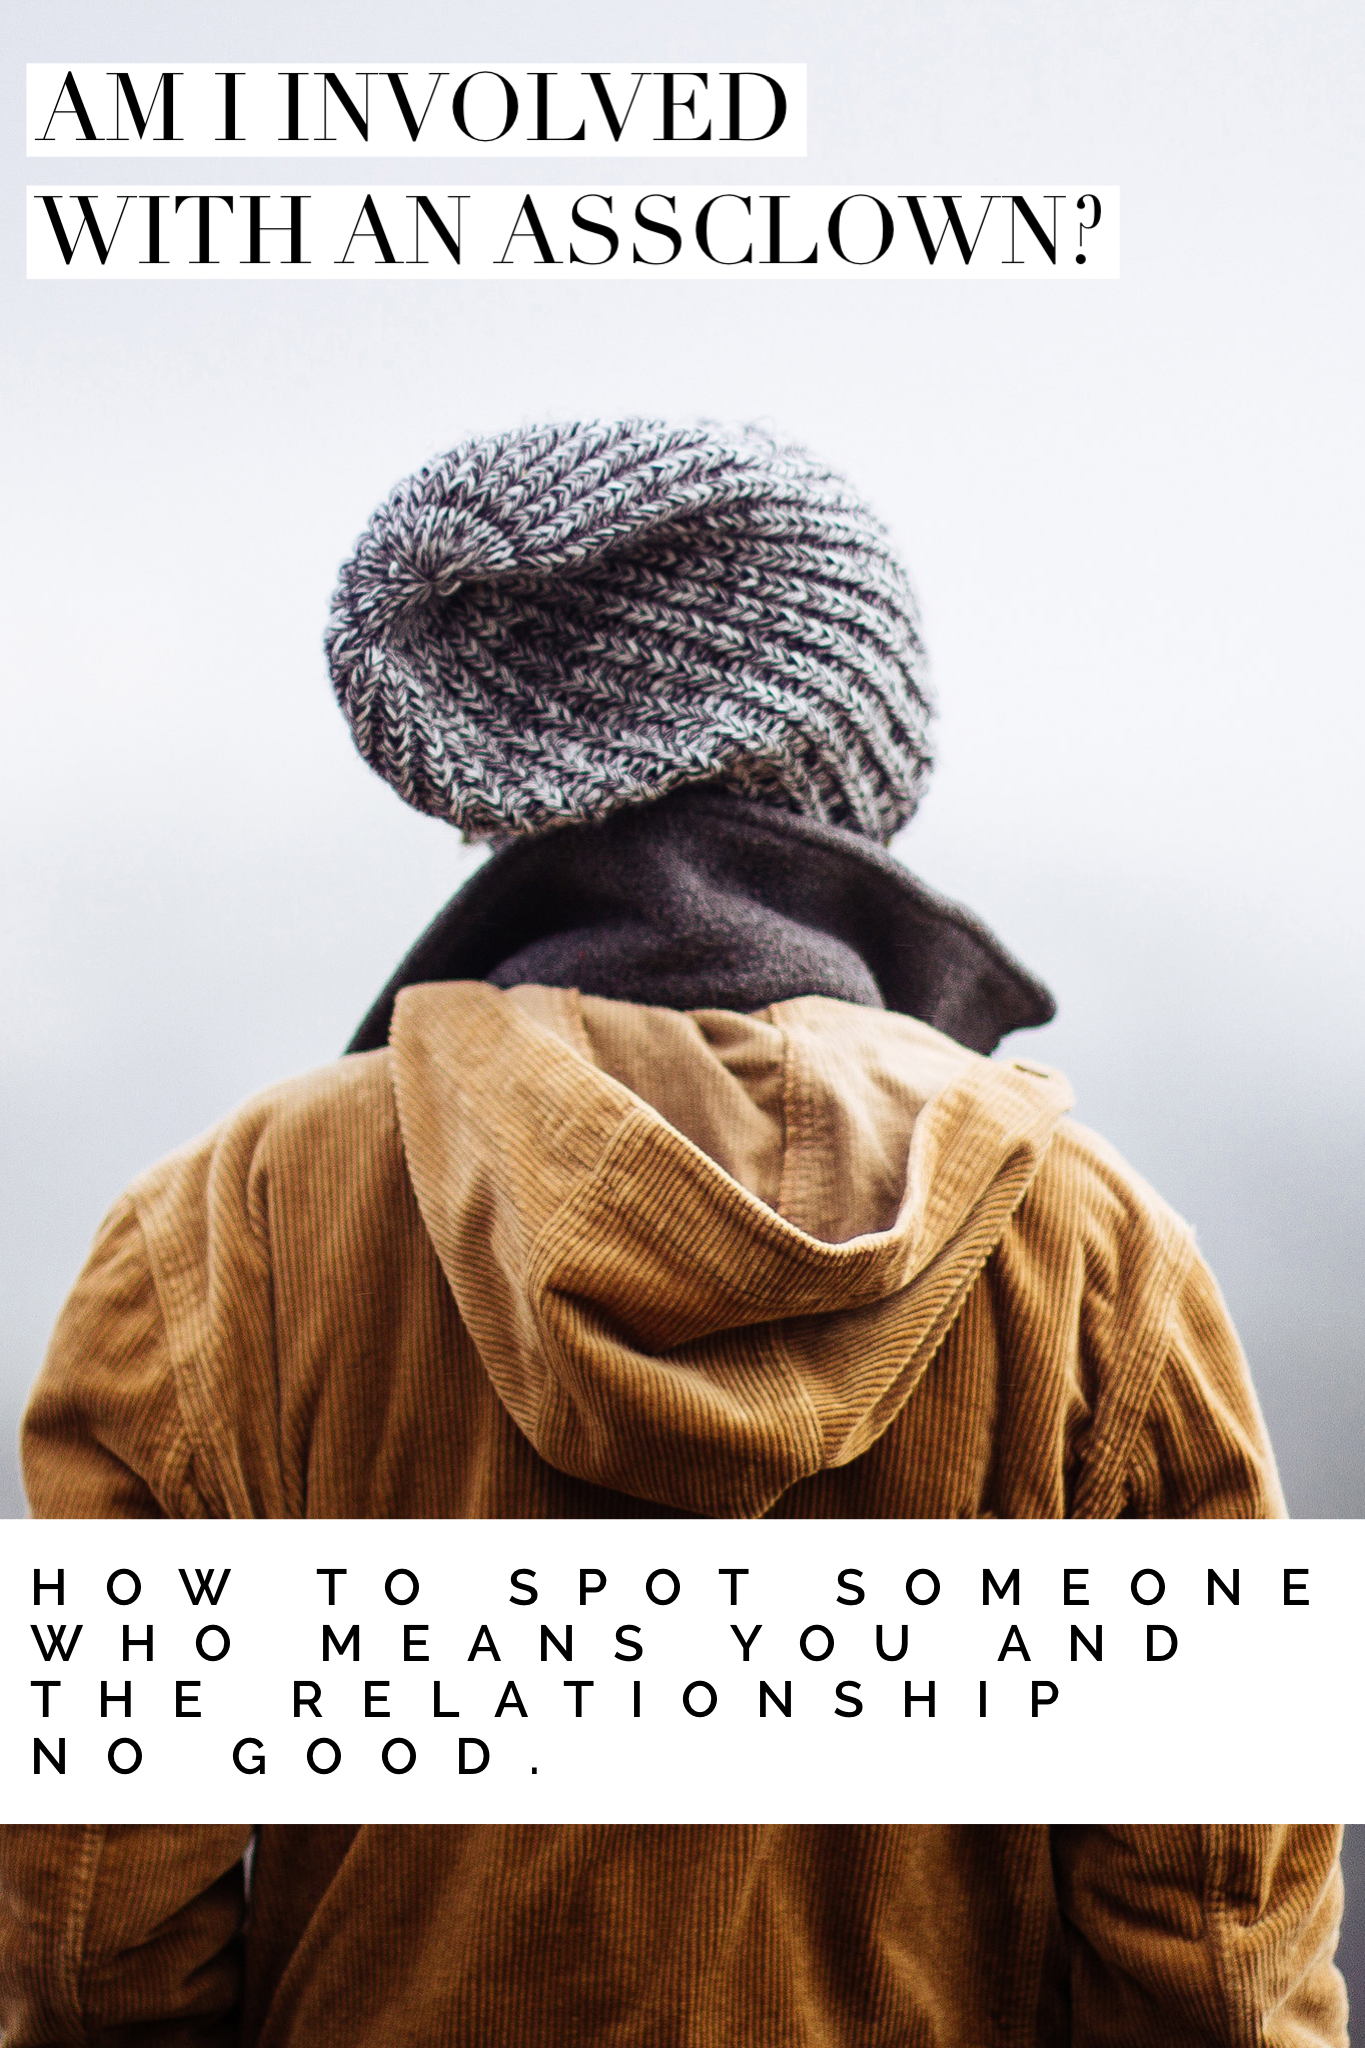 Am I involved with an assclown? How to spot someone who means you and the relationship no good